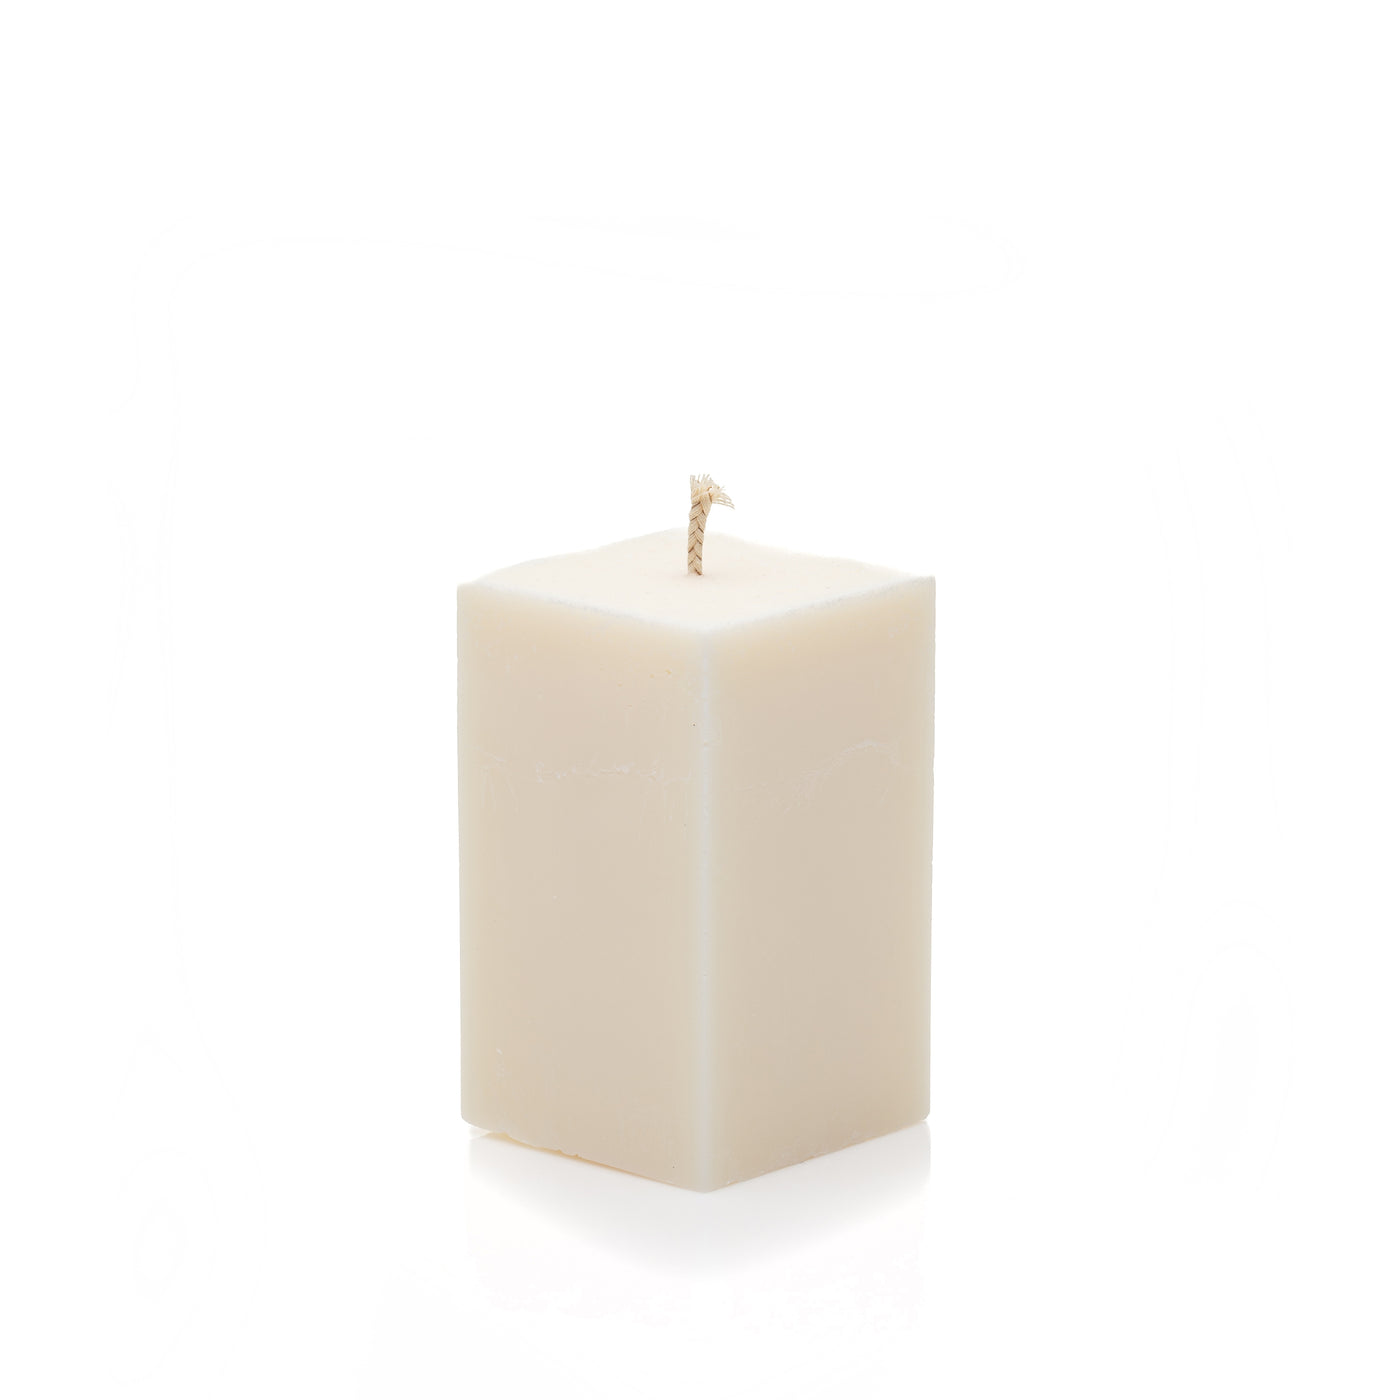 PIVOINE "Naked" scented candle